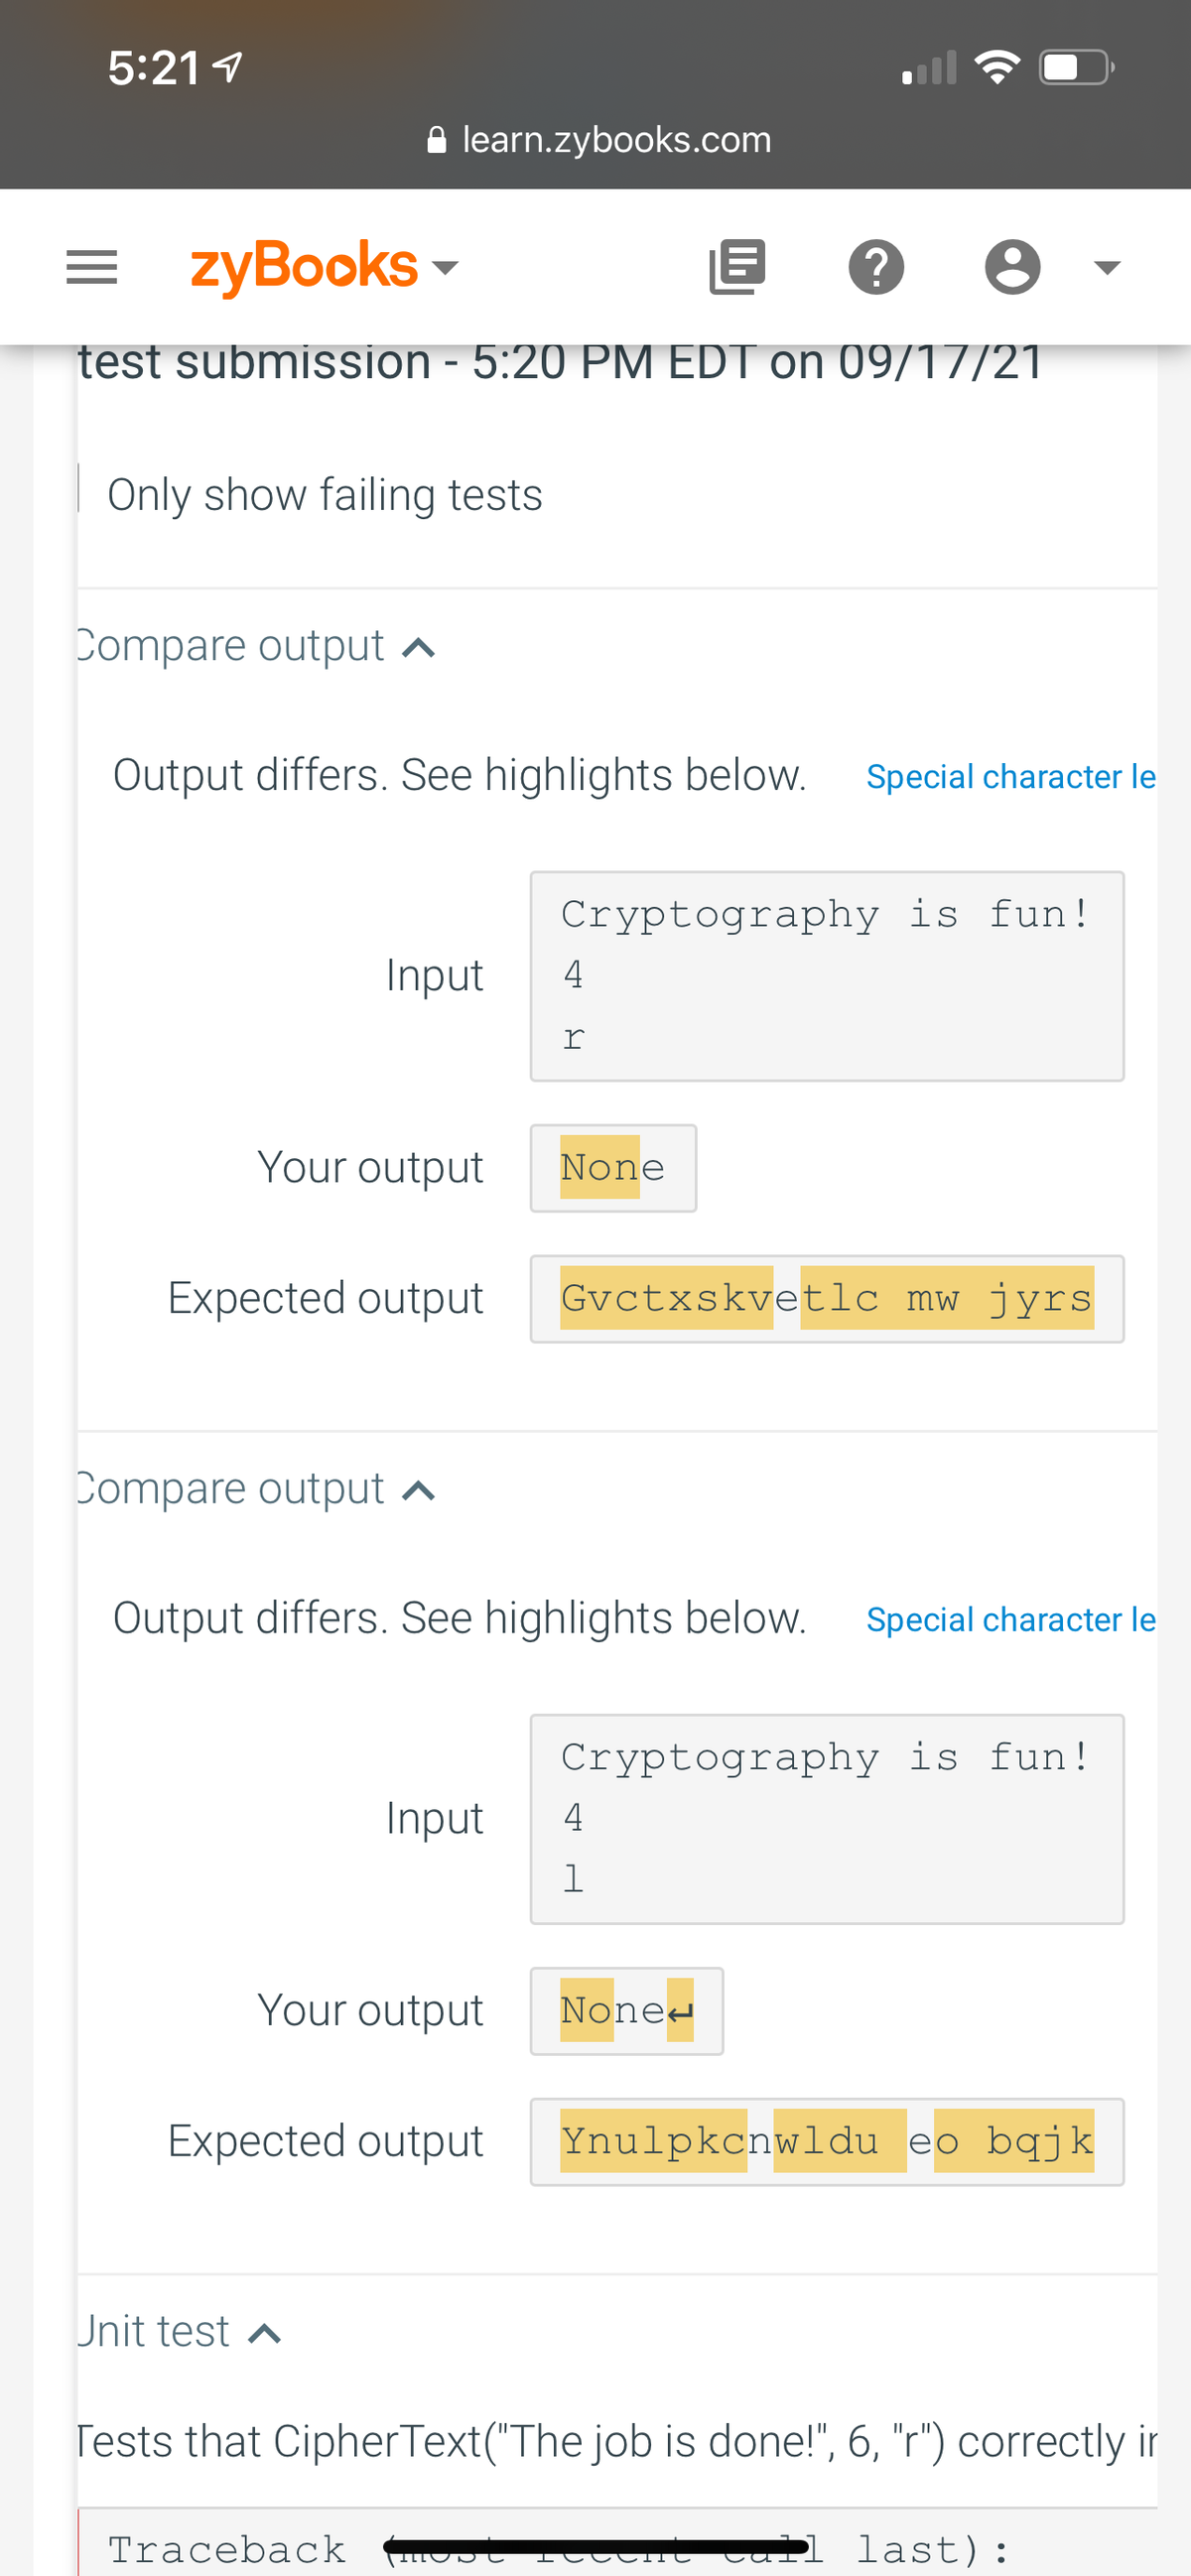 5:21 1
A learn.zybooks.com
= zyBooks -
test submission - 5:20 PM EDT on 09/17/21
Only show failing tests
Compare output ^
Output differs. See highlights below.
Special character le
Cryptography is fun!
Input
4
r
Your output
None
Expected output
Gvctxskvetlc mw jyrs
Compare output ^
Output differs. See highlights below.
Special character le
Cryptography is fun!
Input
4
Your output
None-
Expected output
Ynulpkcnwldu eo bqjk
Unit test a
Tests that CipherText("The job is done!", 6, "r") correctly ir
Traceback
Tettnt Jall last):
